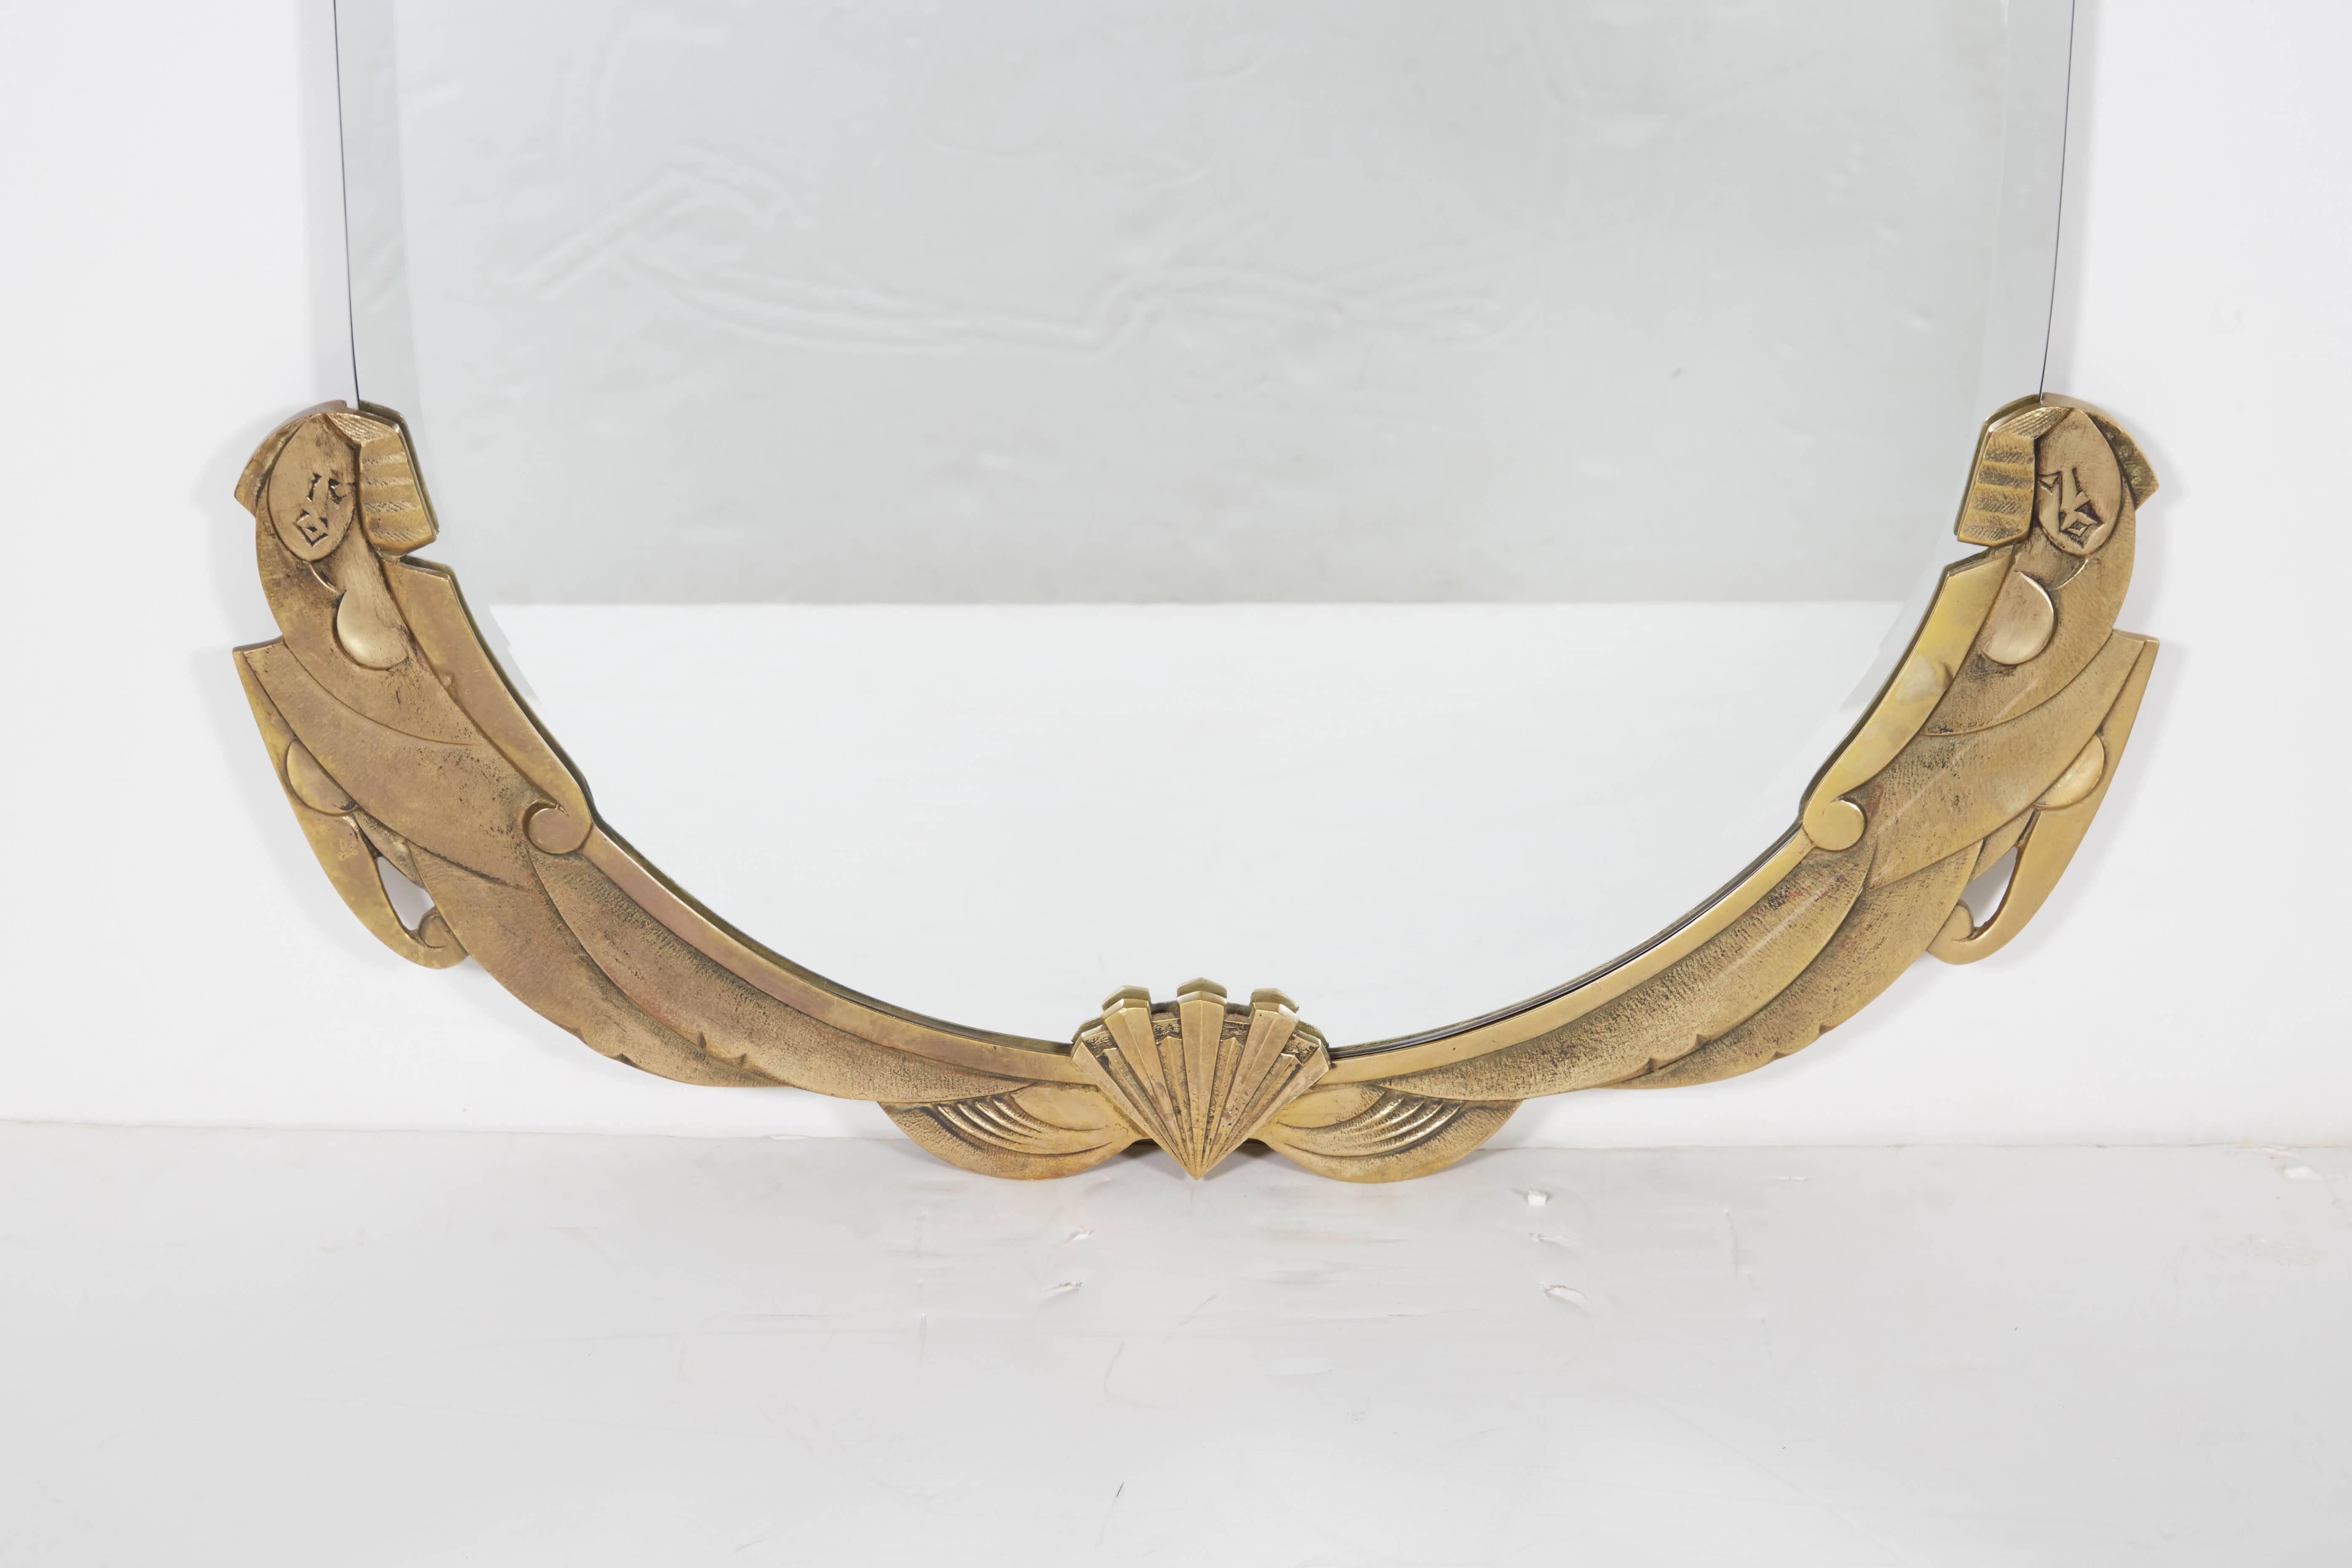 French Art Deco bevelled glass mirror with truncated top depicting a stylized nude woman flanking either side of the bronze surround.
This mirror can be used in a bathroom, hallway, bedroom, over a fireplace mantel, console.
The bronze frame can